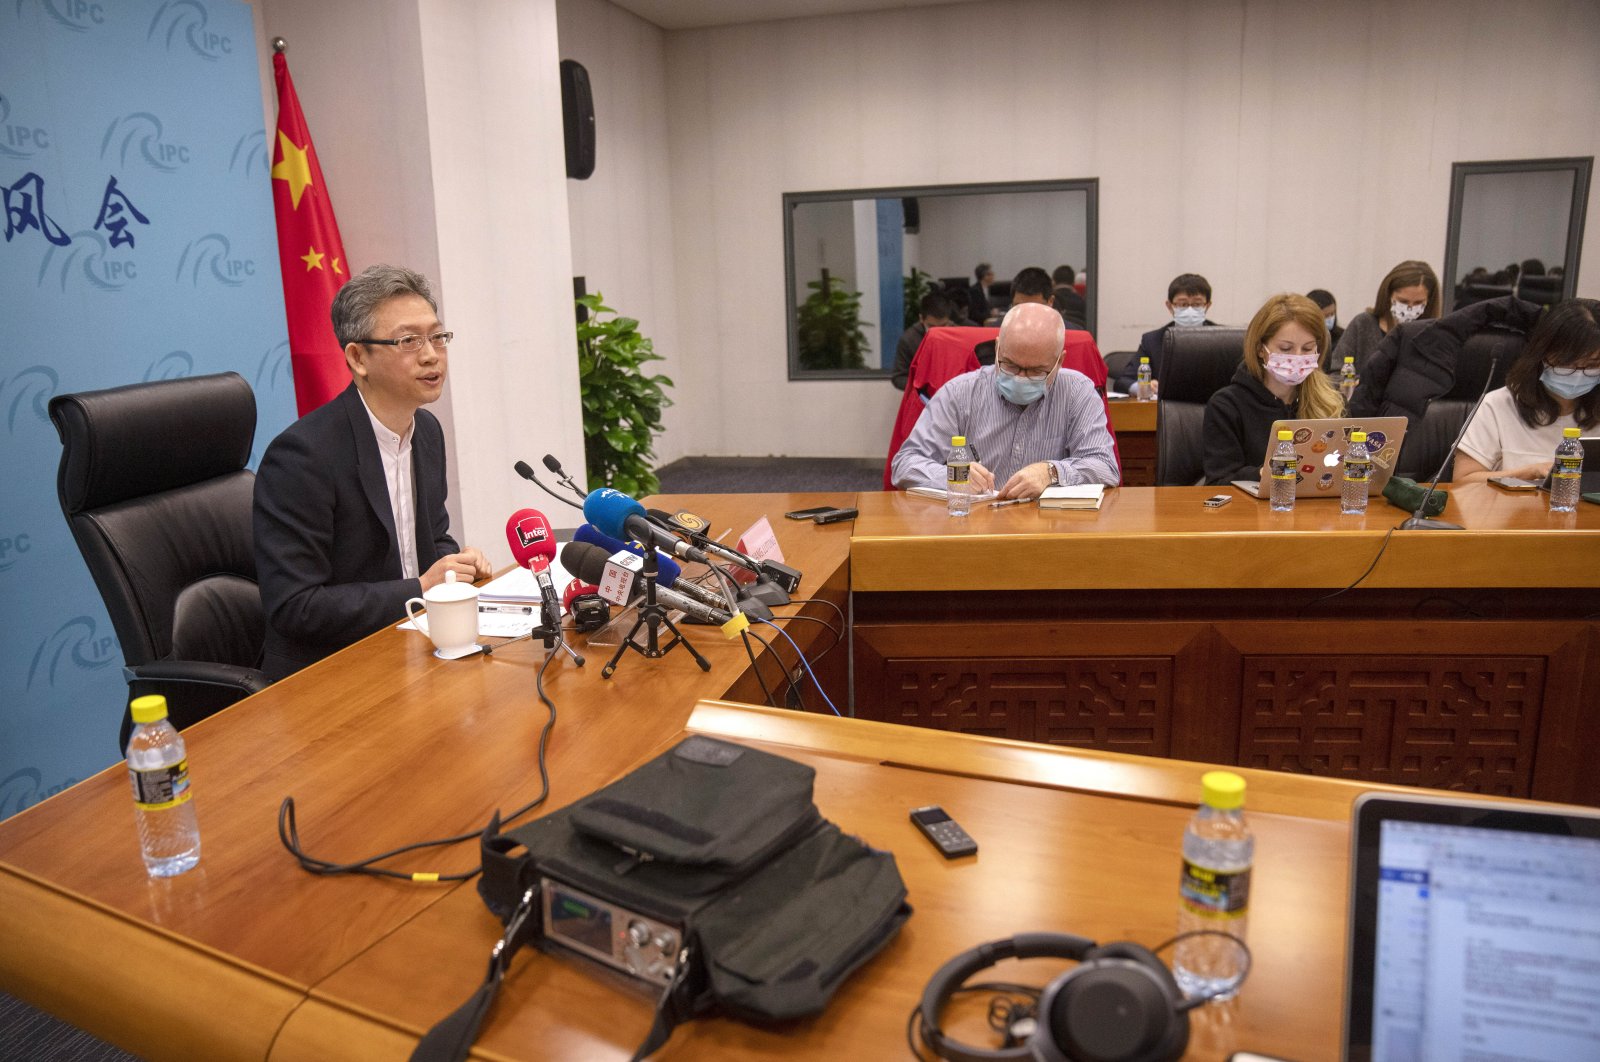 Director General of the Department of European Affairs Wang Lutong speaks during a news briefing at the Ministry of Foreign Affairs in Beijing, April 2, 2022. (AP Photo)